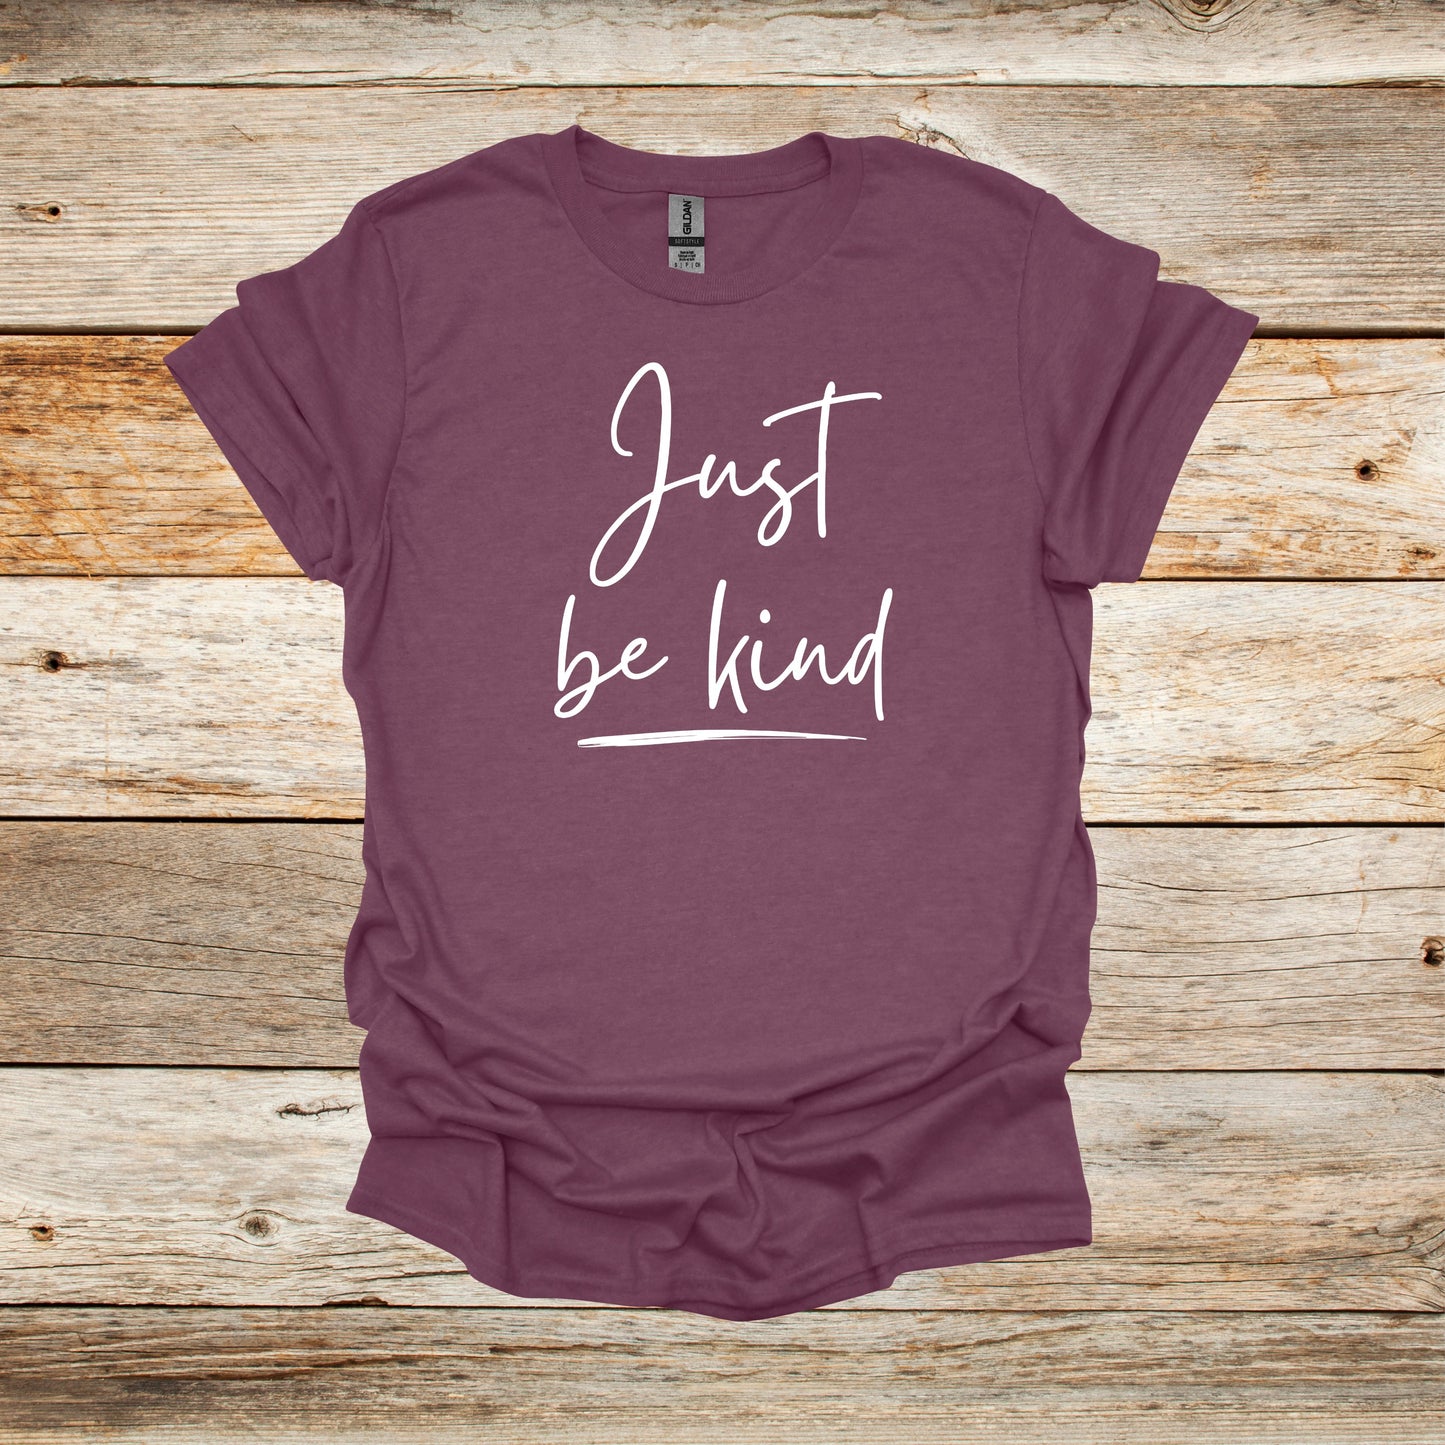 Sayings T-Shirt - Just Be Kind - Men's and Women's Tee Shirts - Sayings T-Shirts Graphic Avenue Heather Maroon Adult Small 